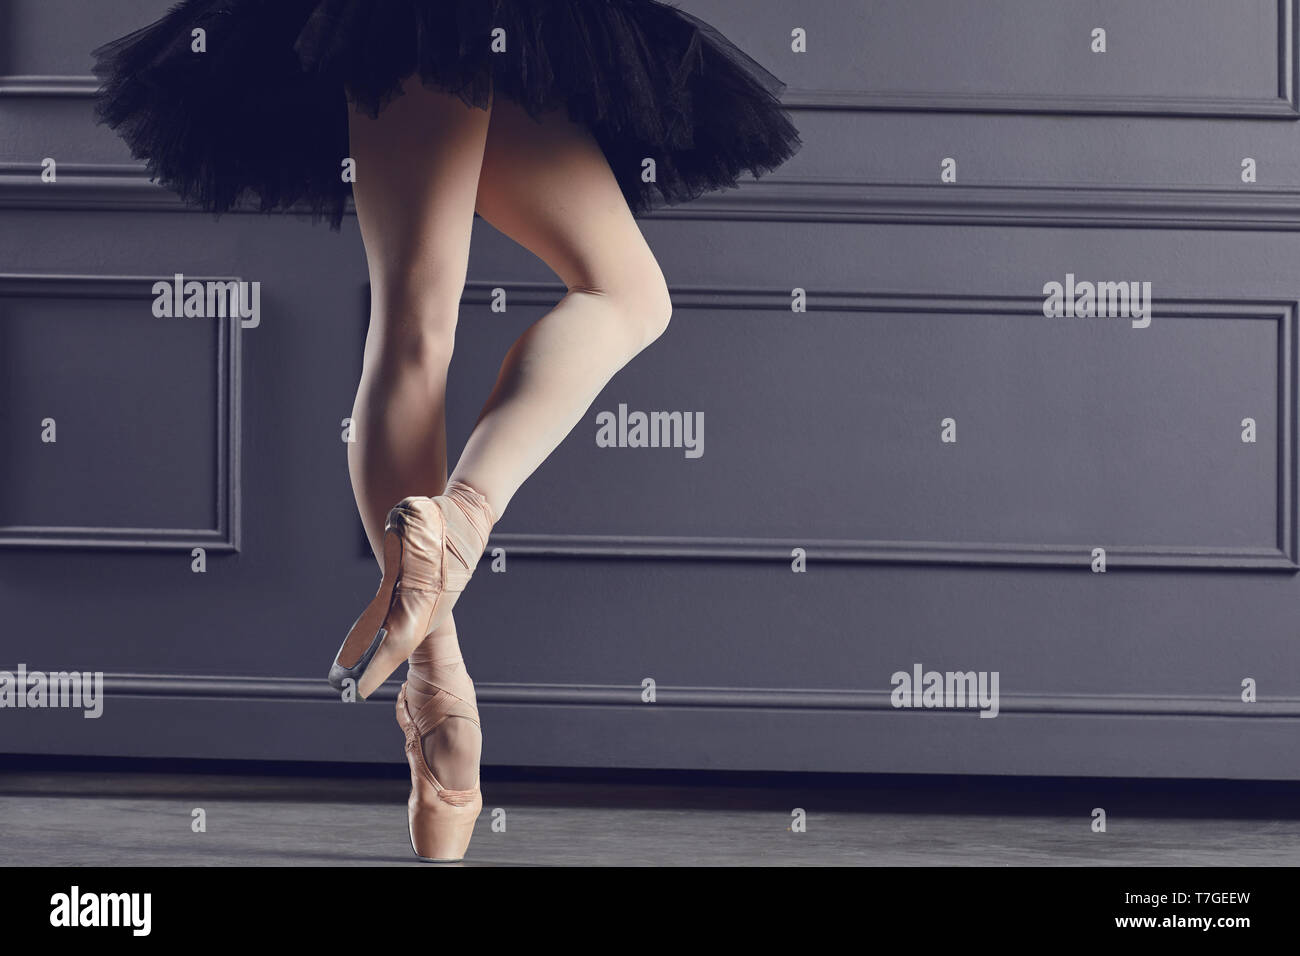 Legs of a ballerina on a black background. Stock Photo